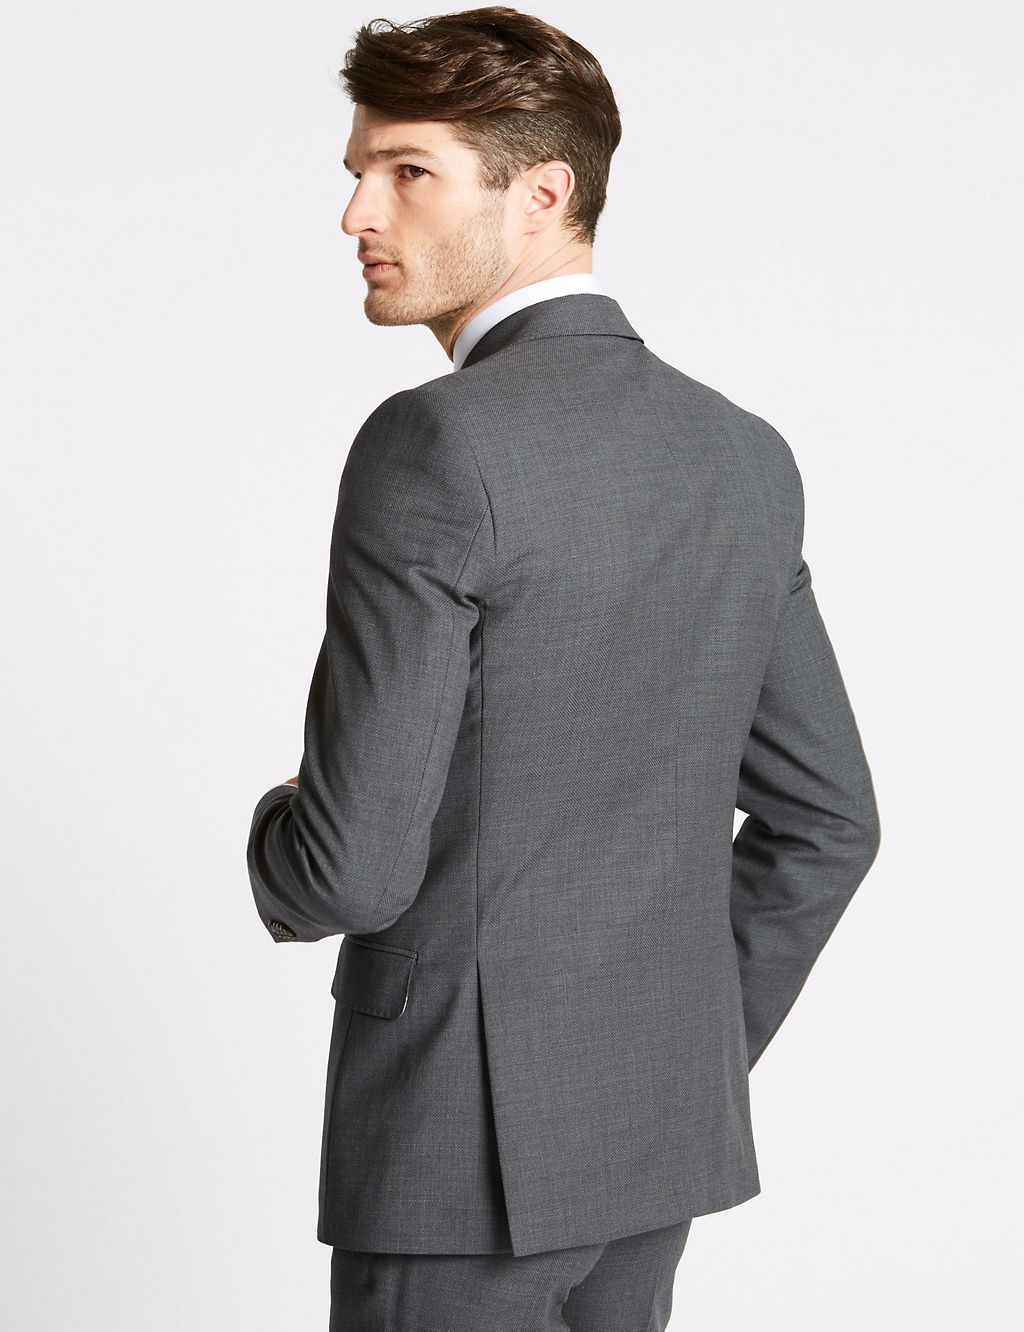 Charcoal Textured Slim Fit Wool Jacket 8 of 8